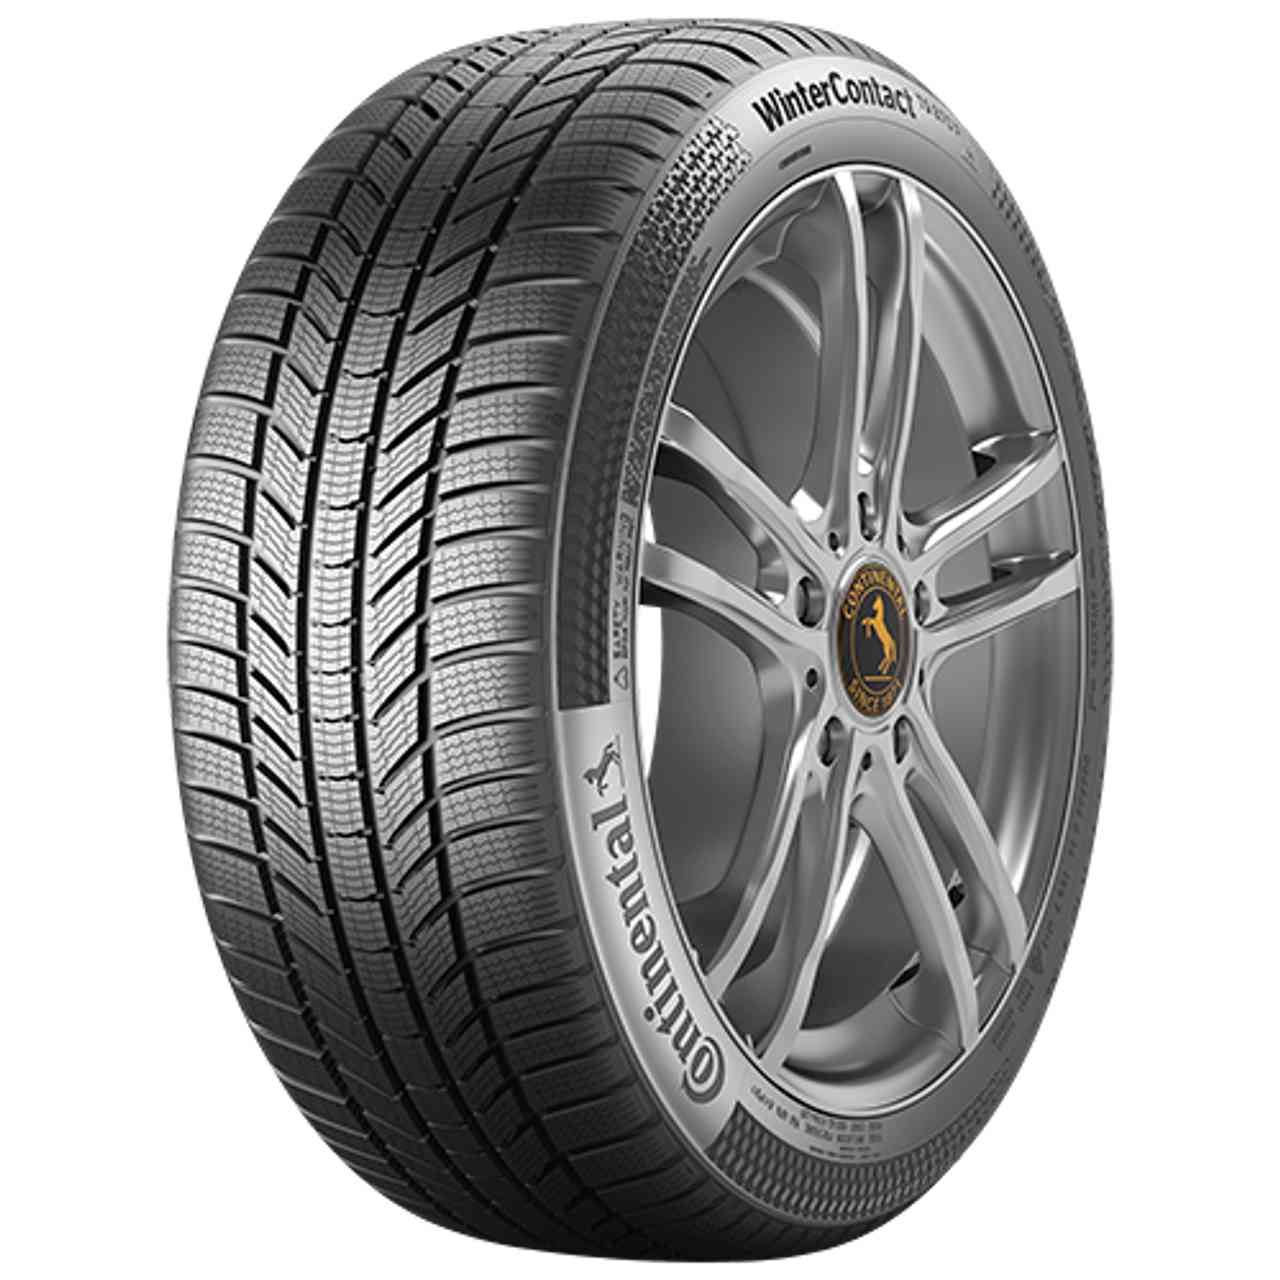 CONTINENTAL WINTERCONTACT TS 870 P (EVc) 215/50R18 92V FR BSW von Continental